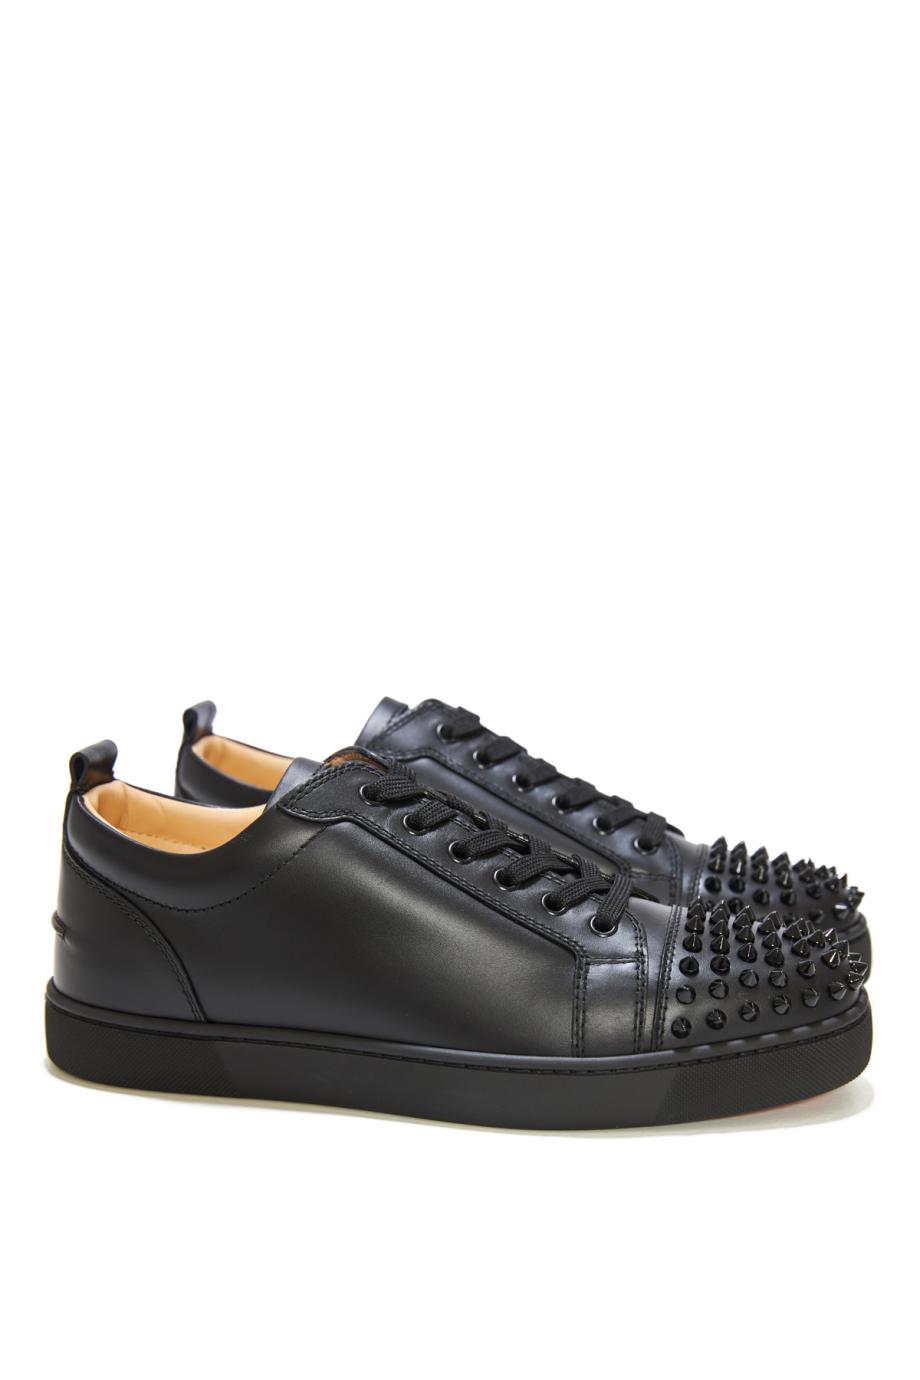 Louis Jr embellished leather sneakers 